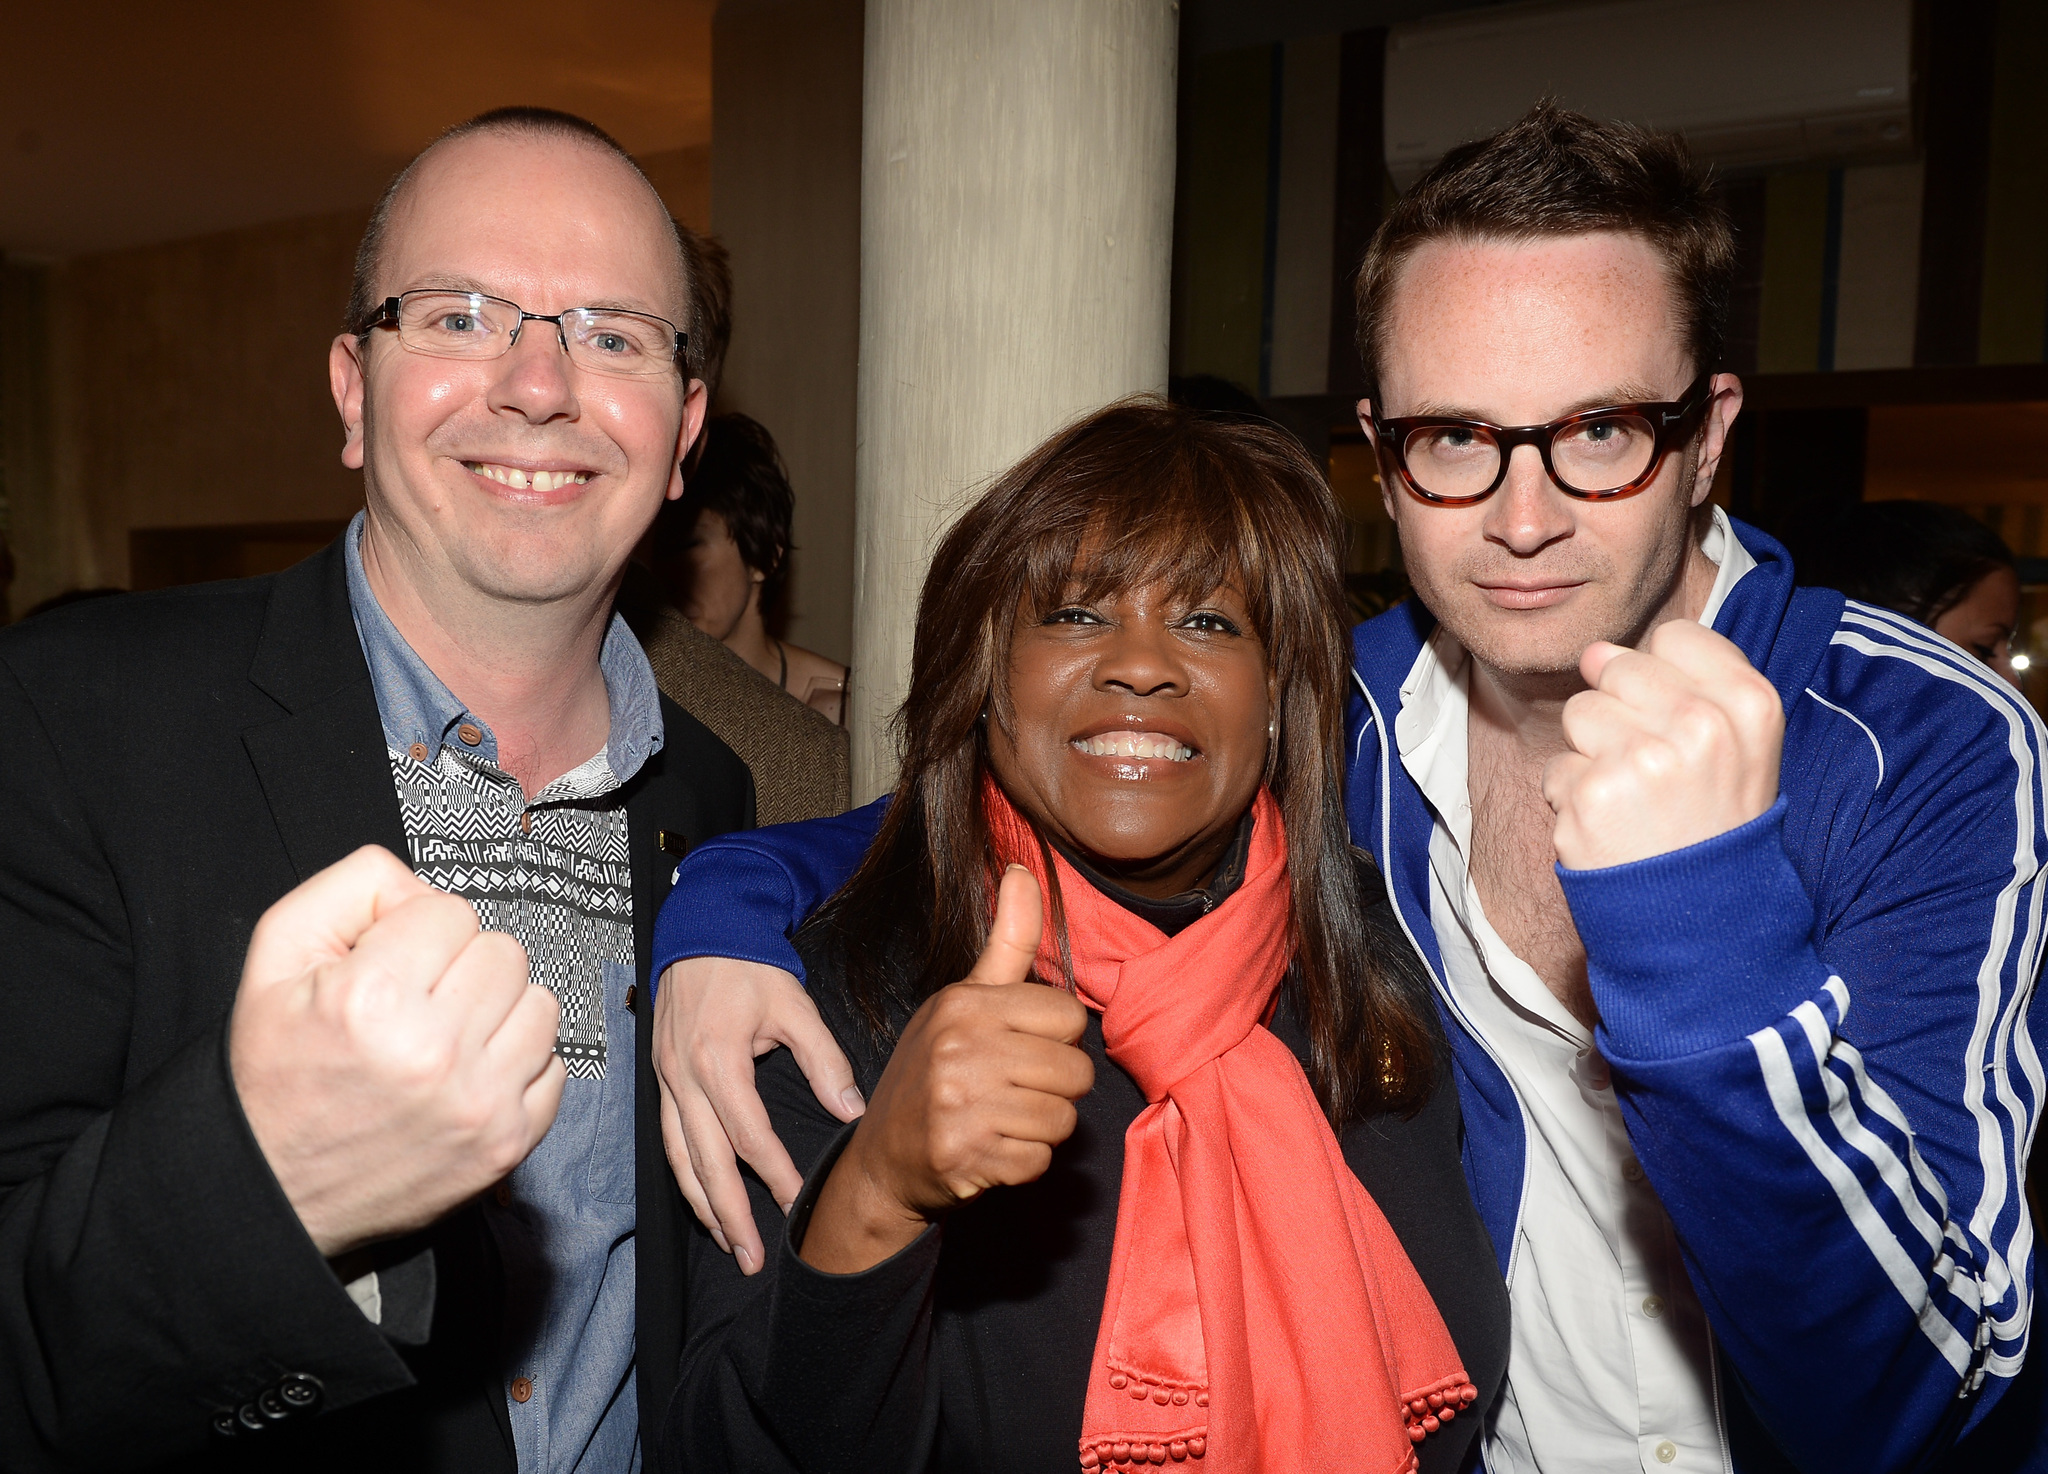 IMDb founder Col Needham, Chaz Ebert and director Nicolas Winding Refn attend the IMDB's 2013 Cannes Film Festival Dinner Party during the 66th Annual Cannes Film Festival at Restaurant Mantel on May 20, 2013 in Cannes, France.